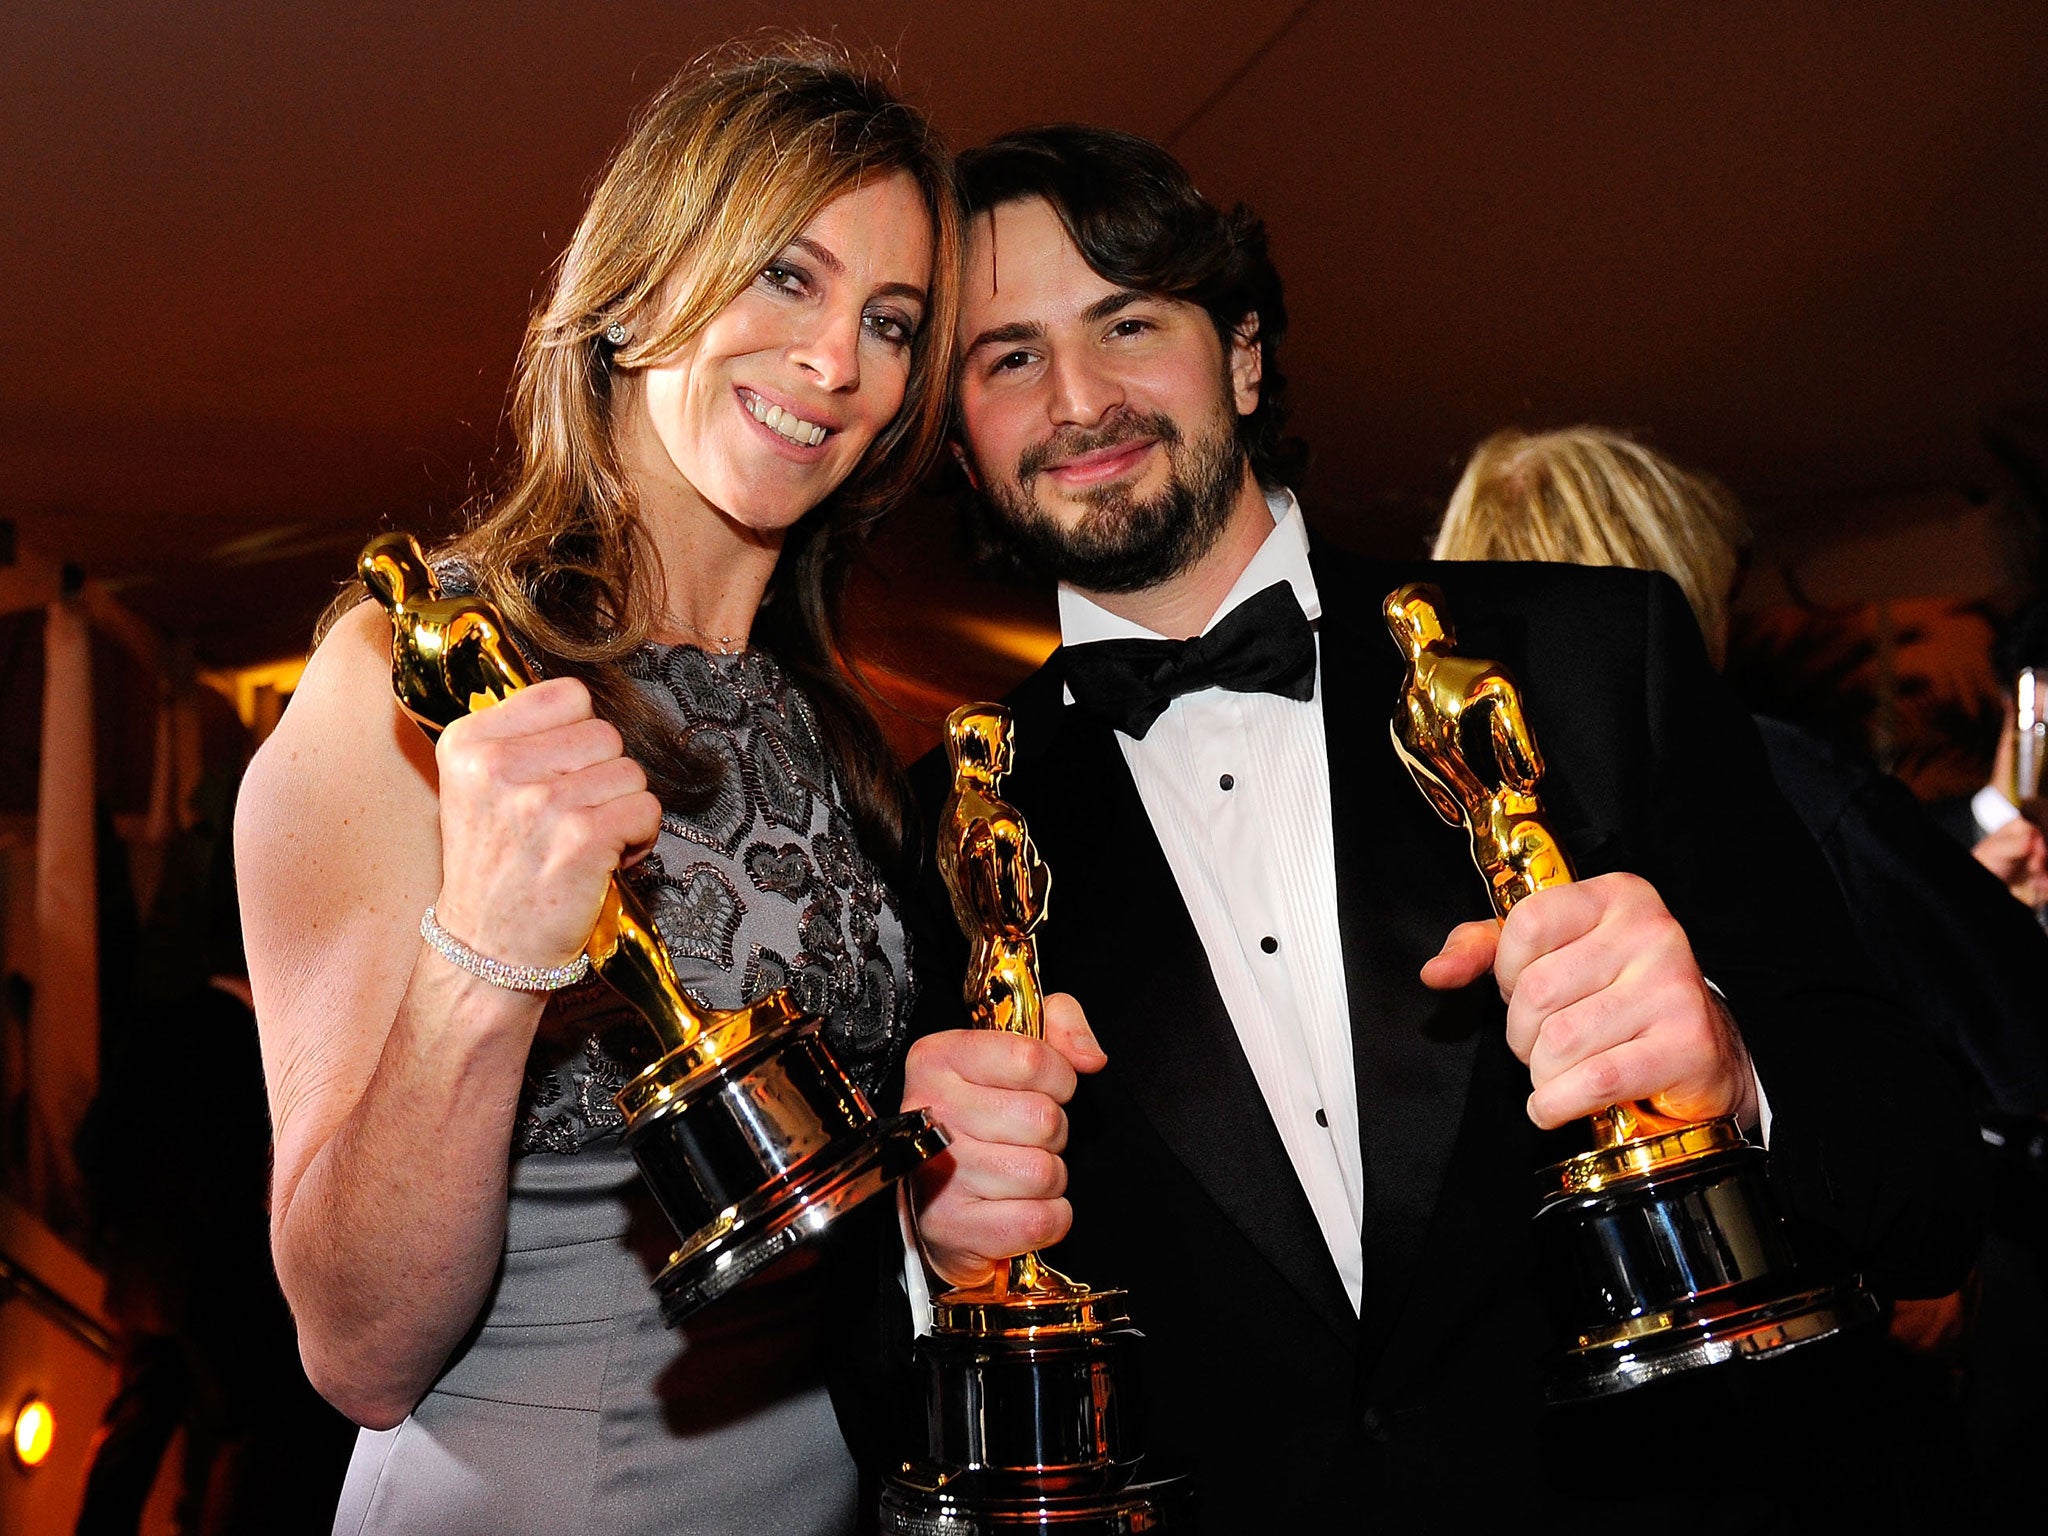 Kathryn Bigelow and Mark Boal with their Oscars for 2008's The Hurt Locker